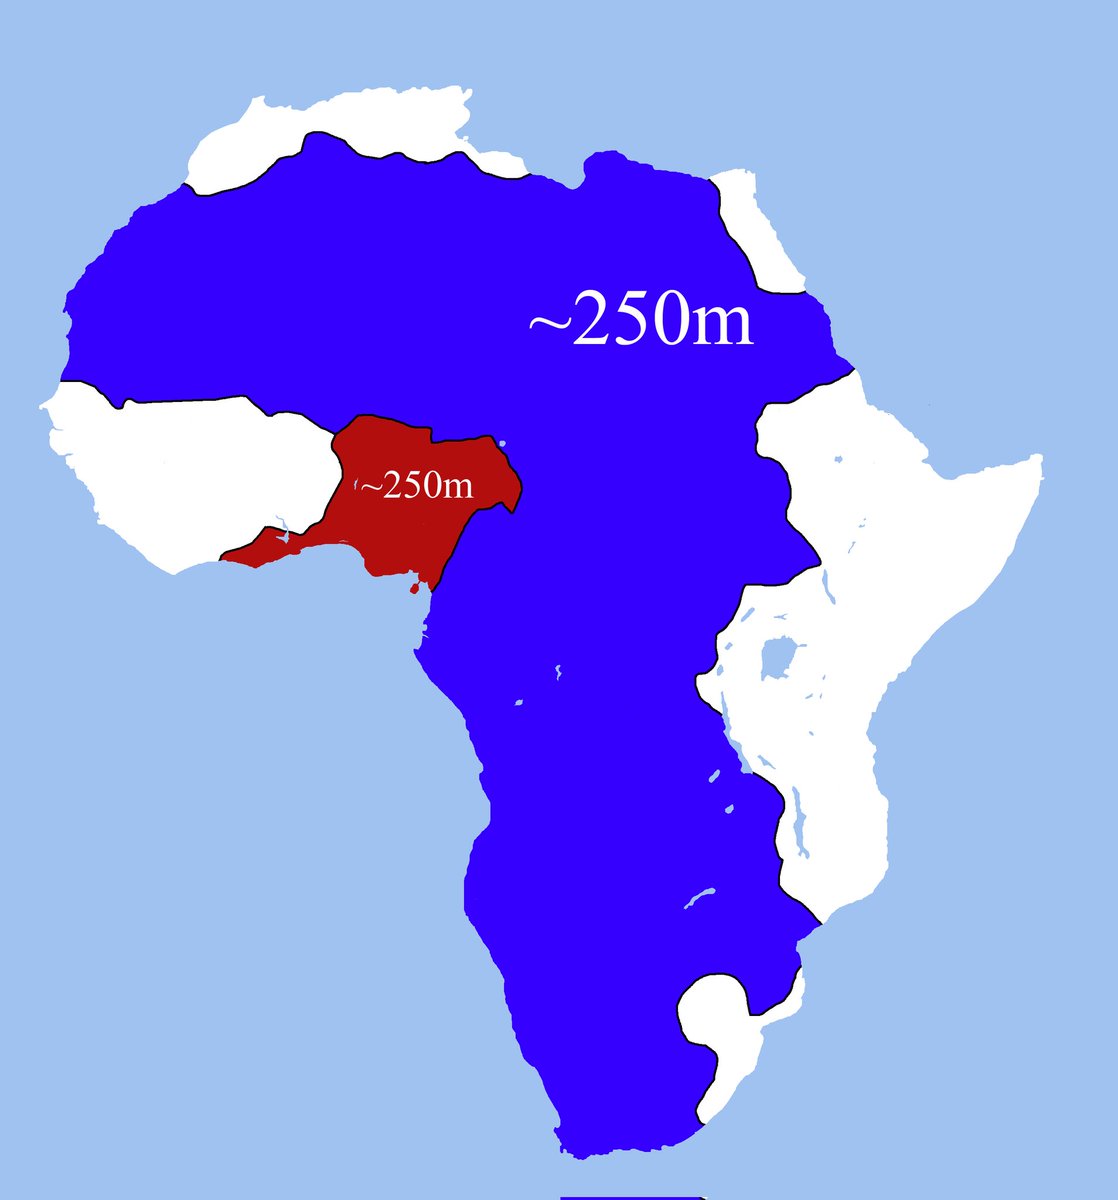 The red and blue areas have about the same population in Africa.